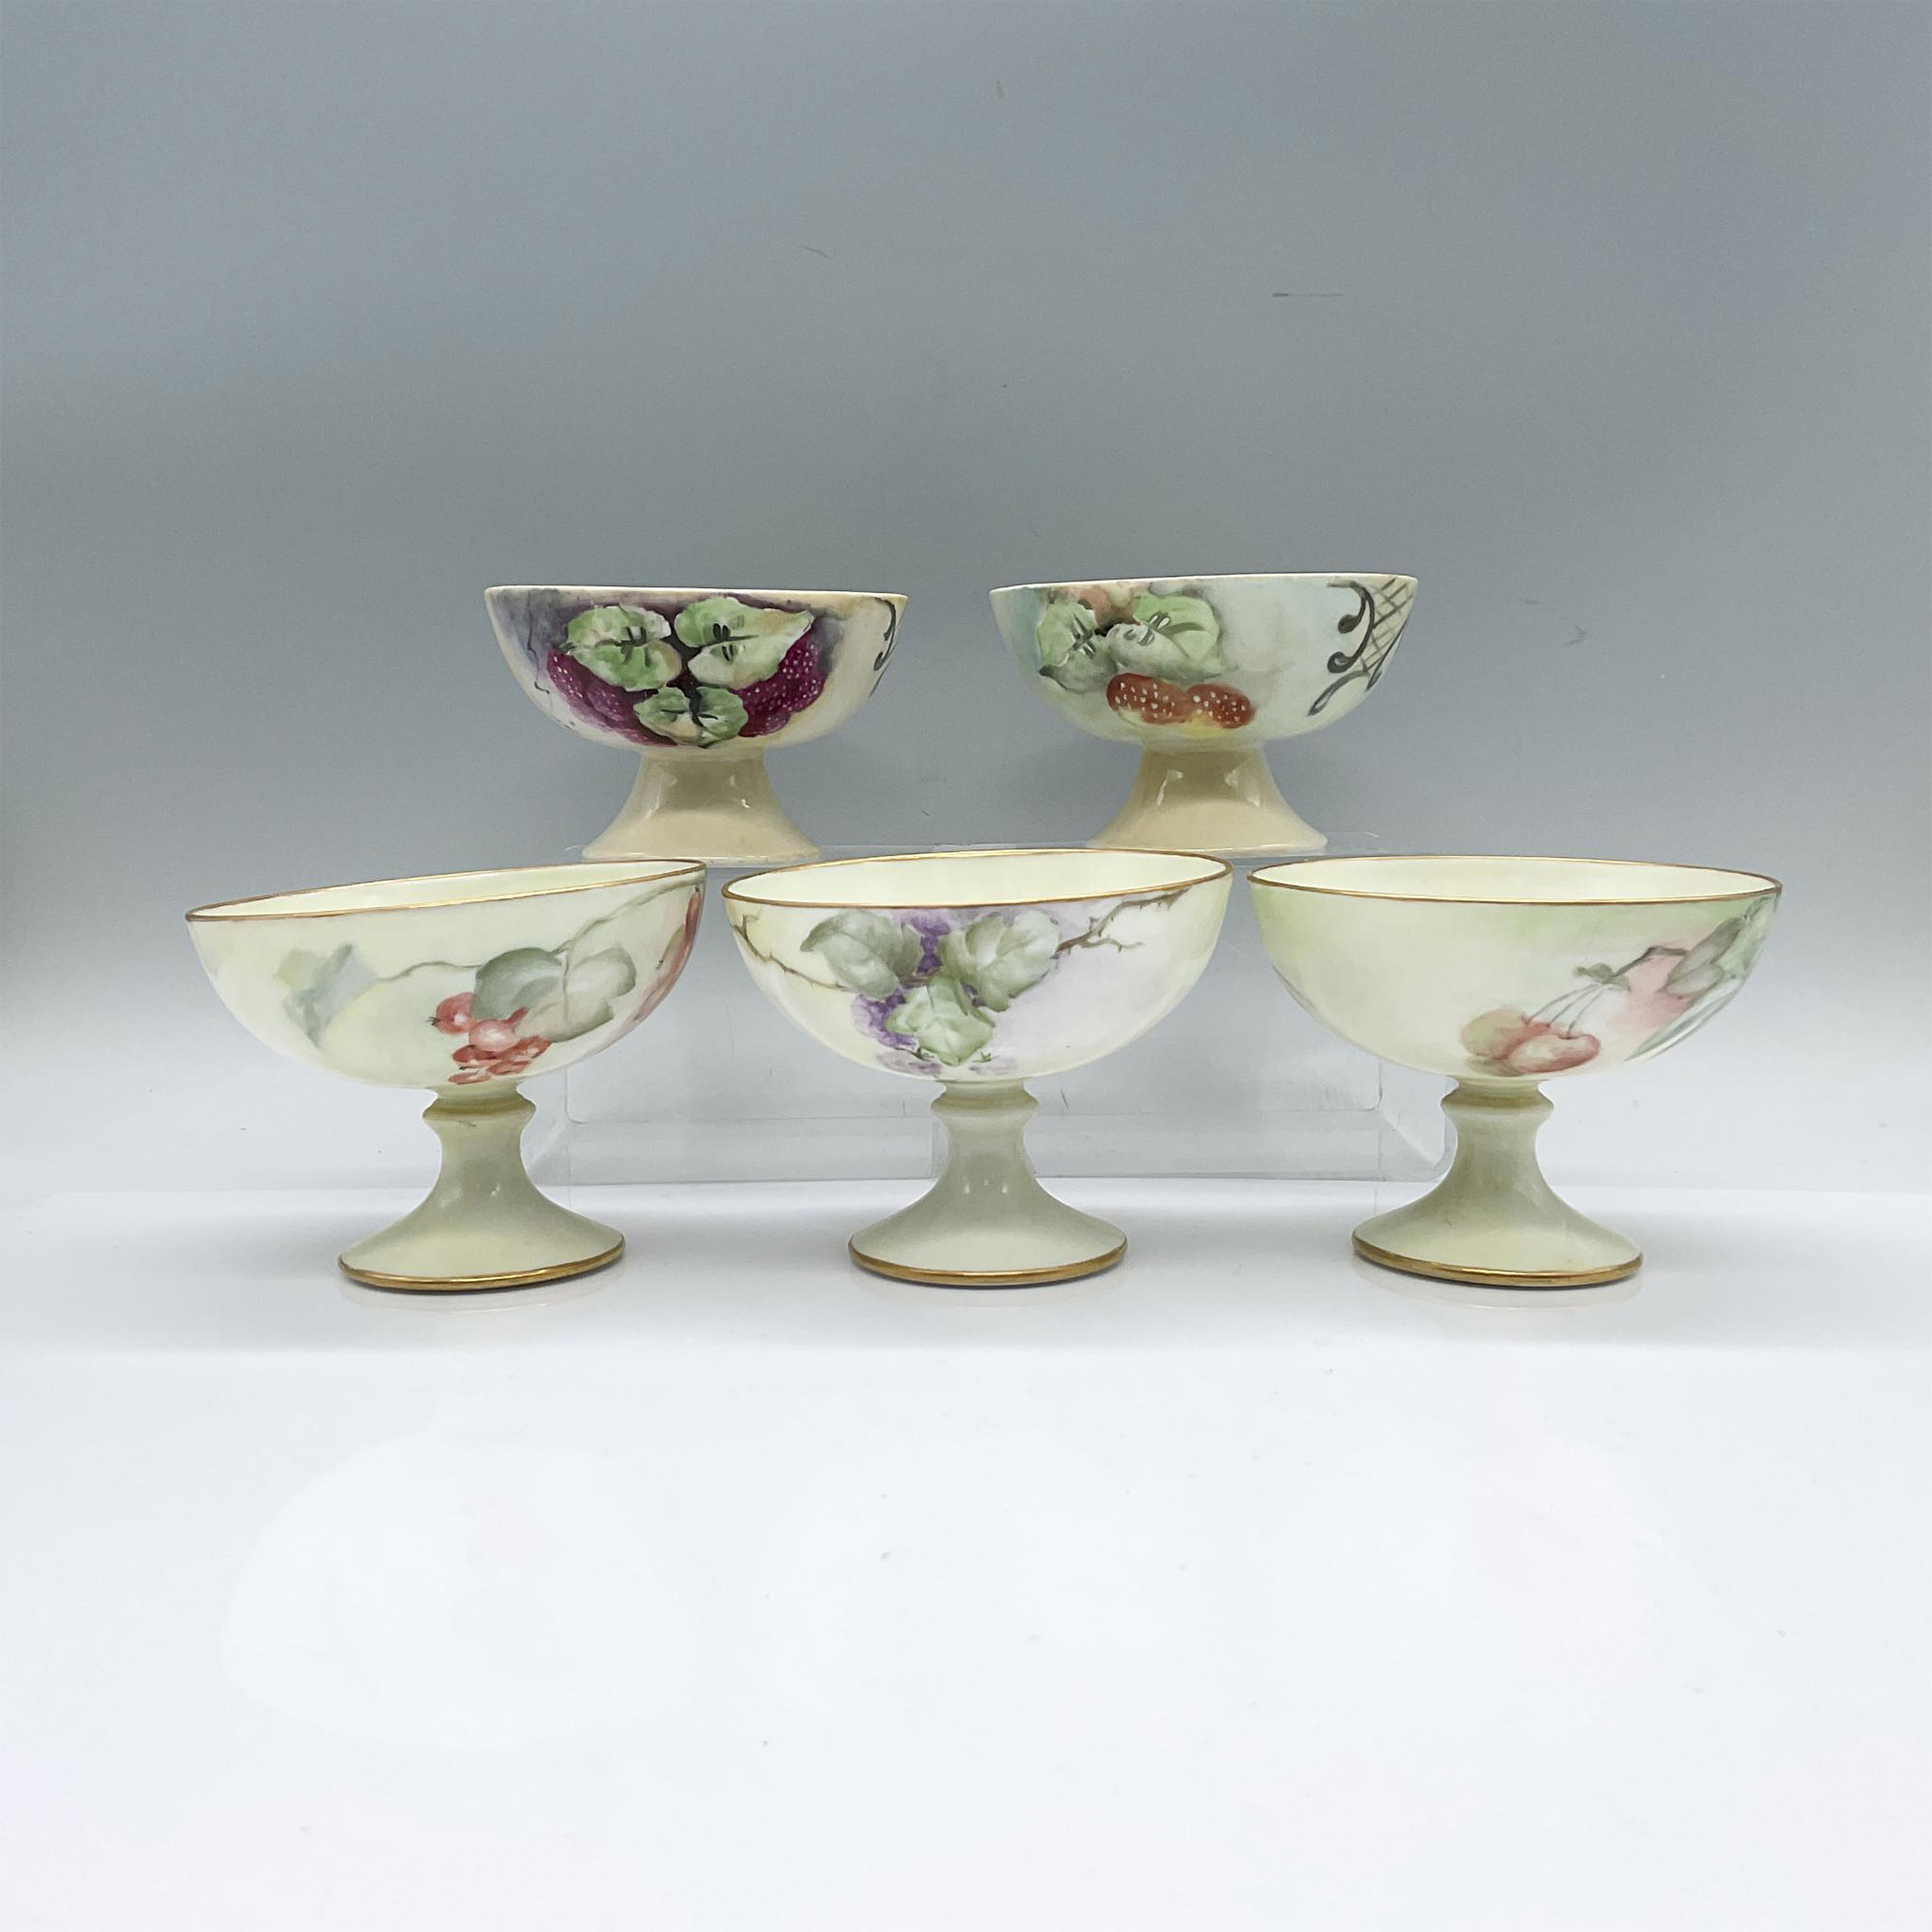 5pc French Style Porcelain Sorbet Footed Bowls - Image 2 of 3